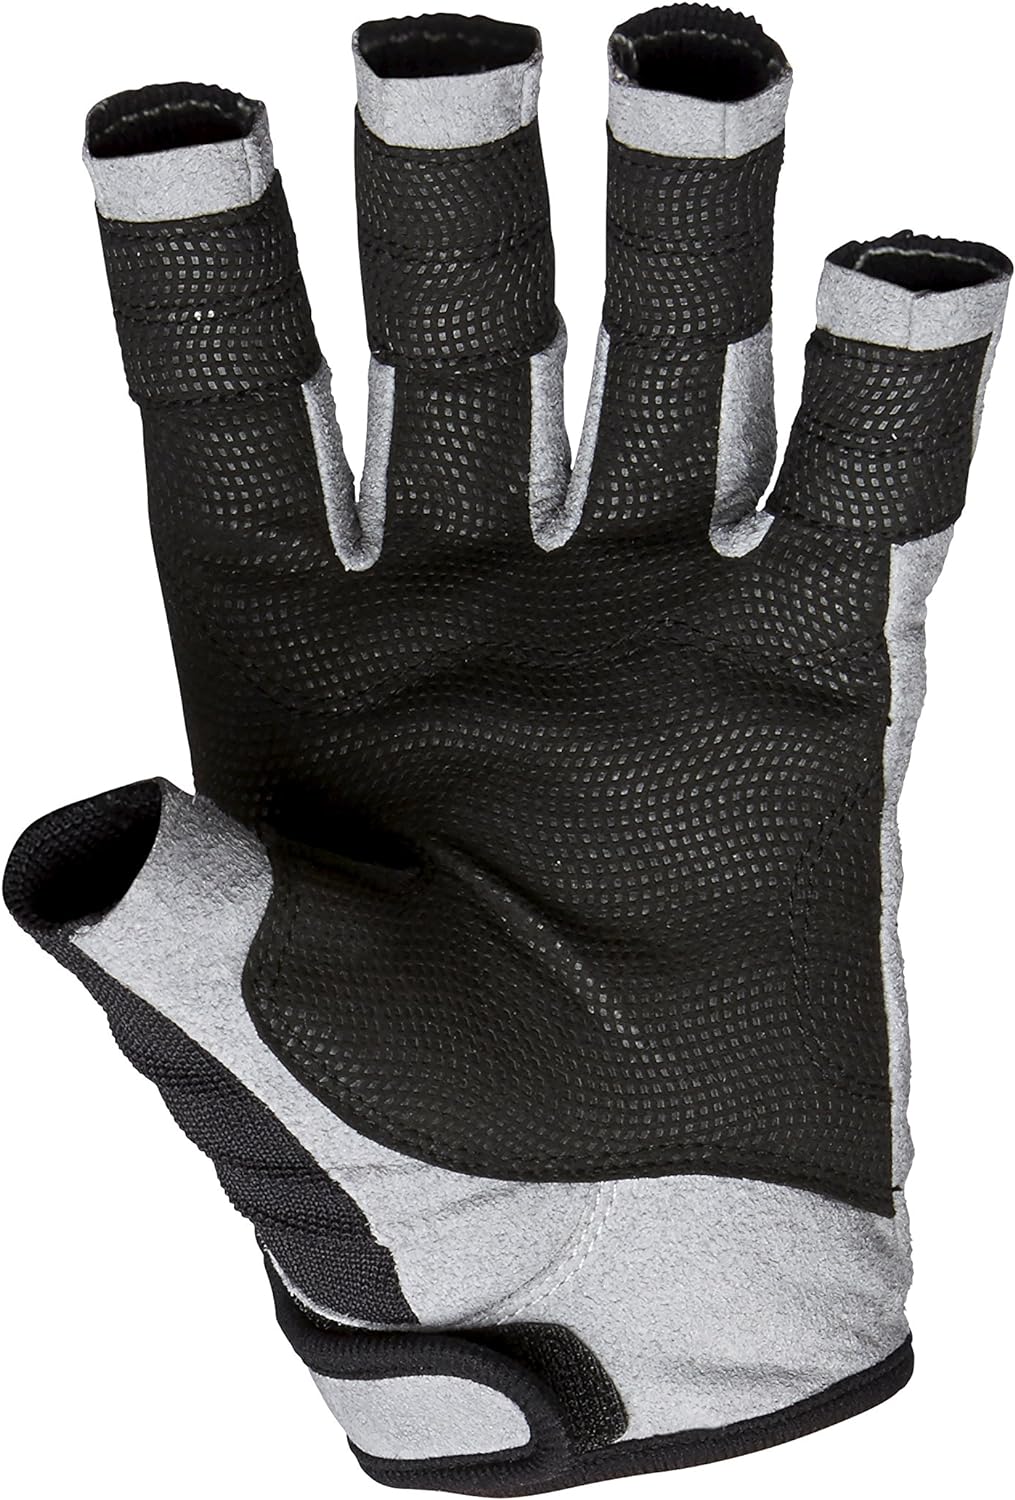 You are currently viewing Helly-Hansen Sailing Glove Short Review